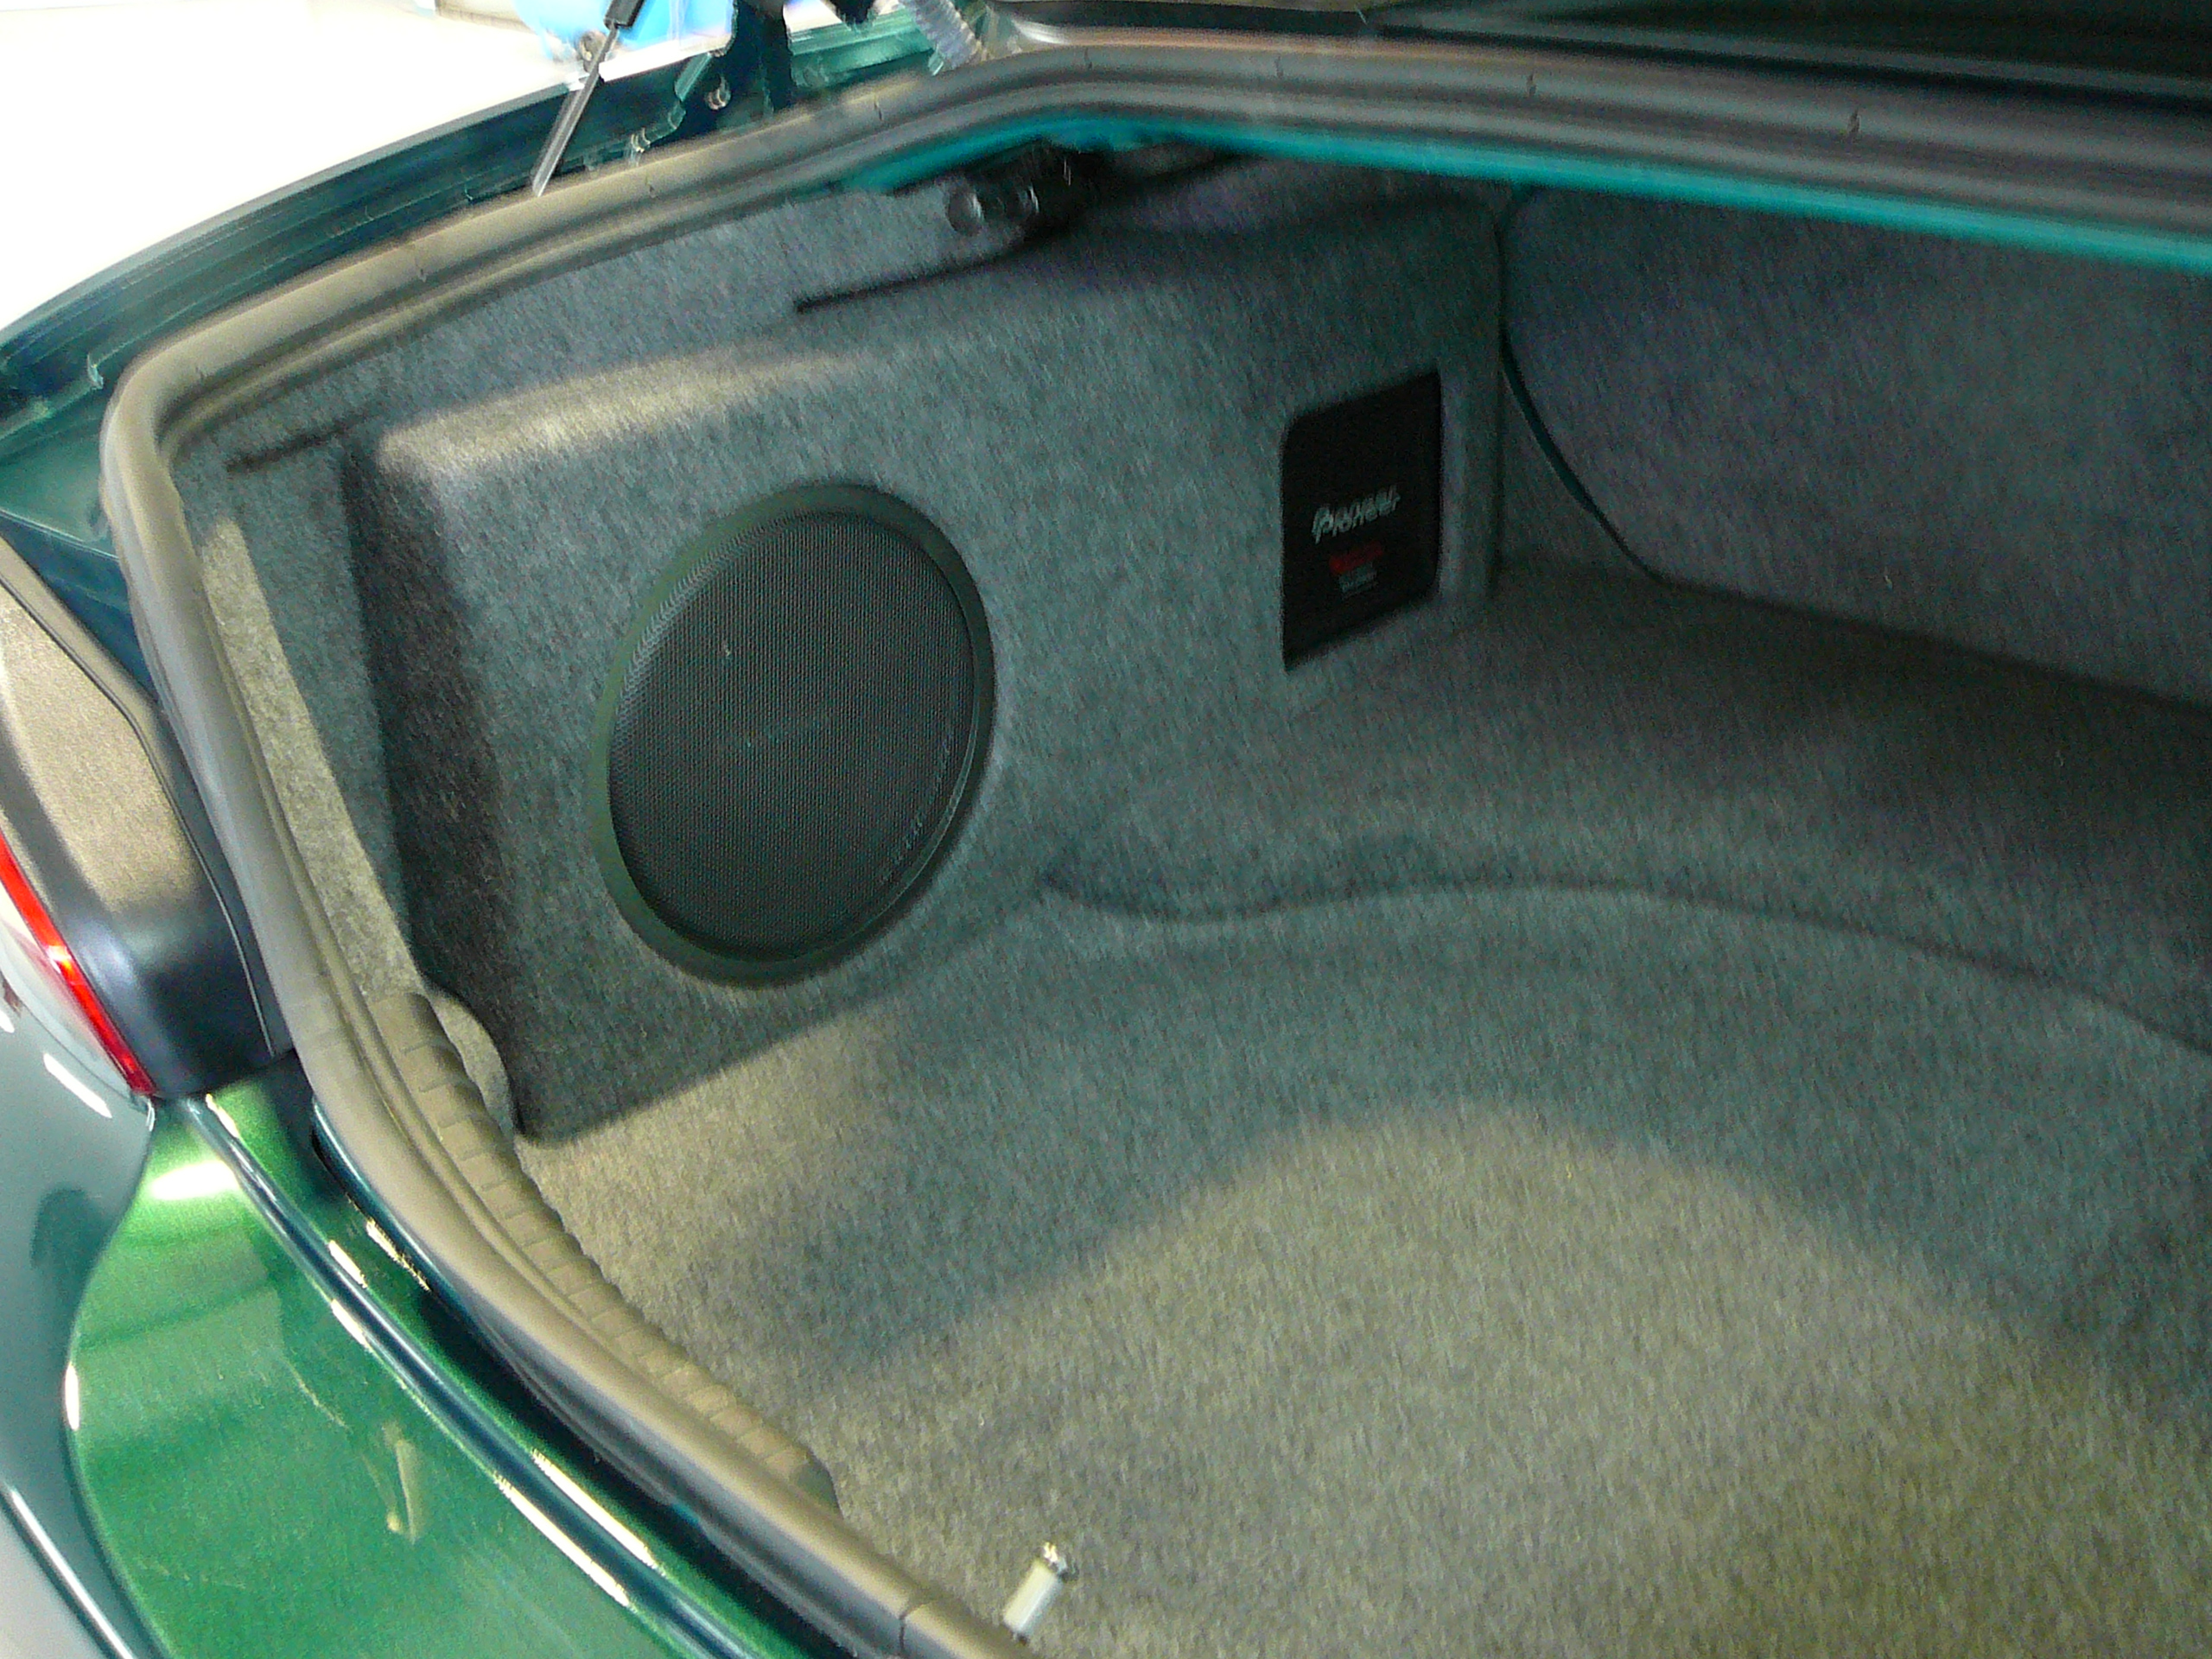 Jaguar X- Type 2009, Pioneer AVH-X8550BT Audio Visual Unit with a Custom Made Subwoofer Installation